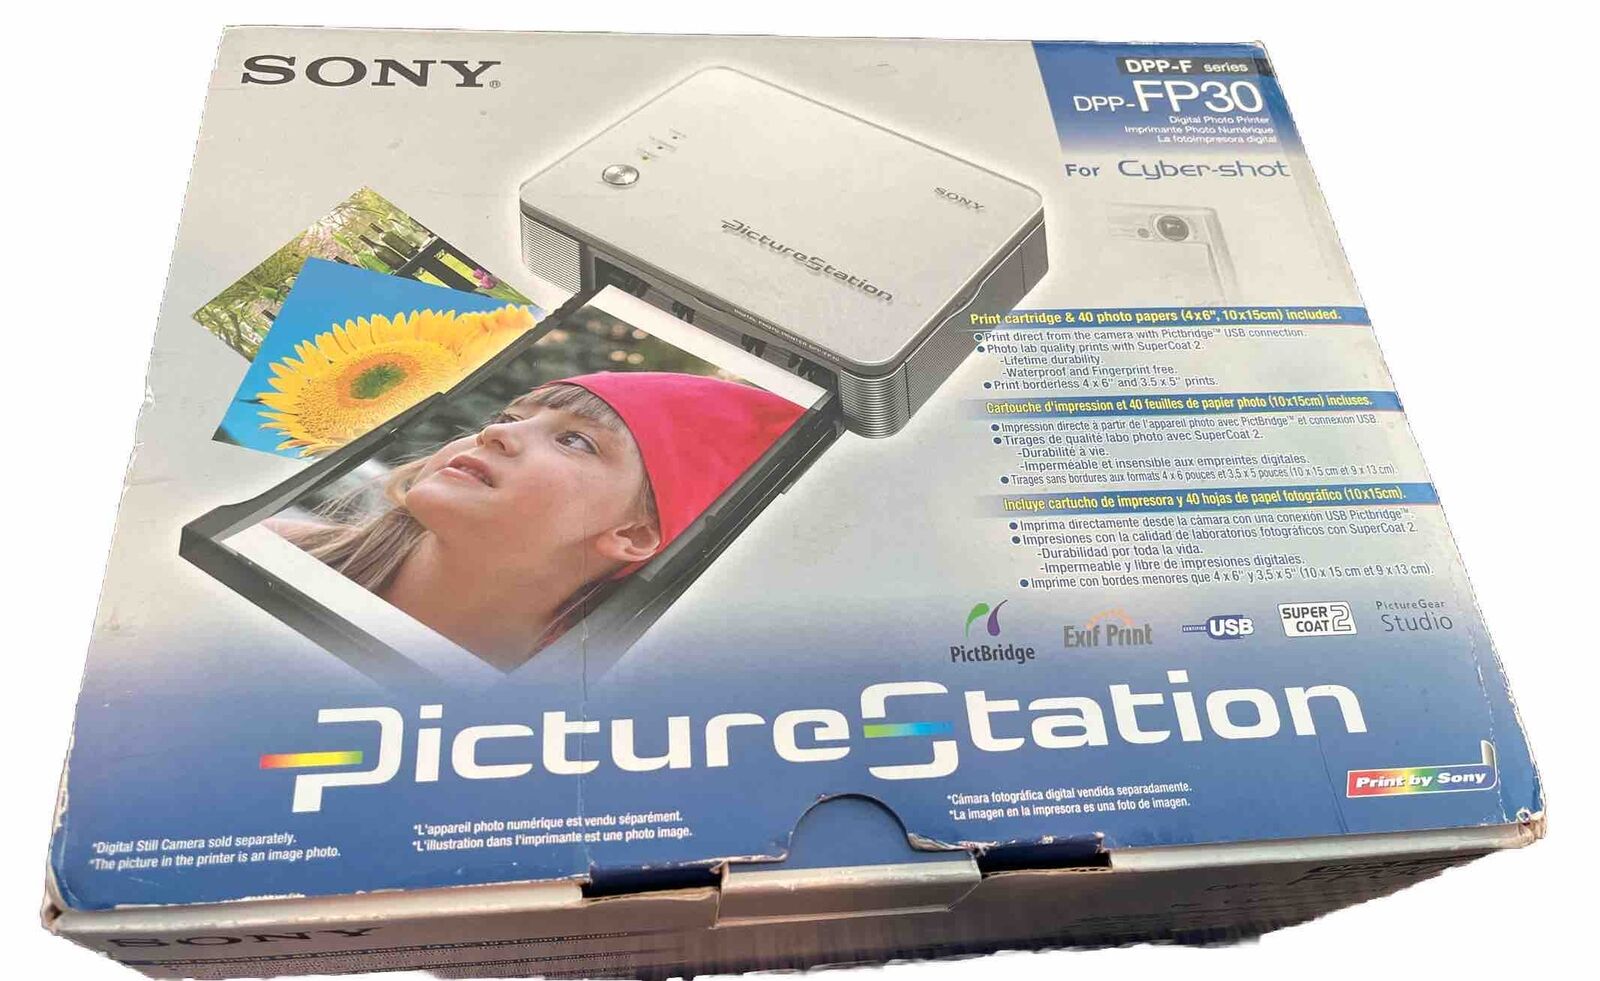 Sony Picture Station Digital Photo Printer DPP-FP30 for Cyber-Shot F Series-New